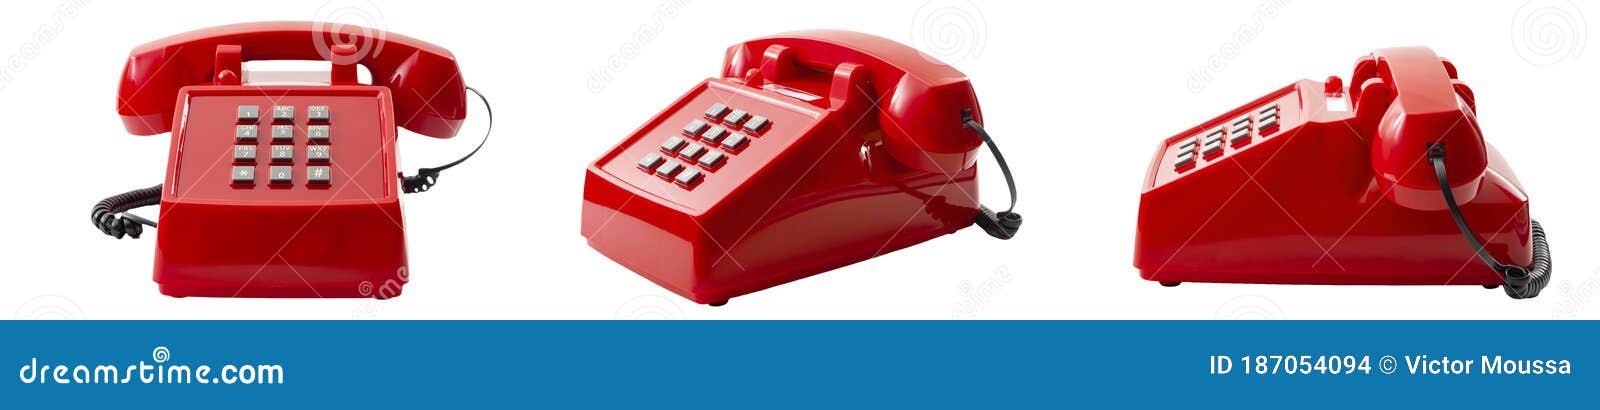 Red telephone. Vintage retro push button telephone isolated on